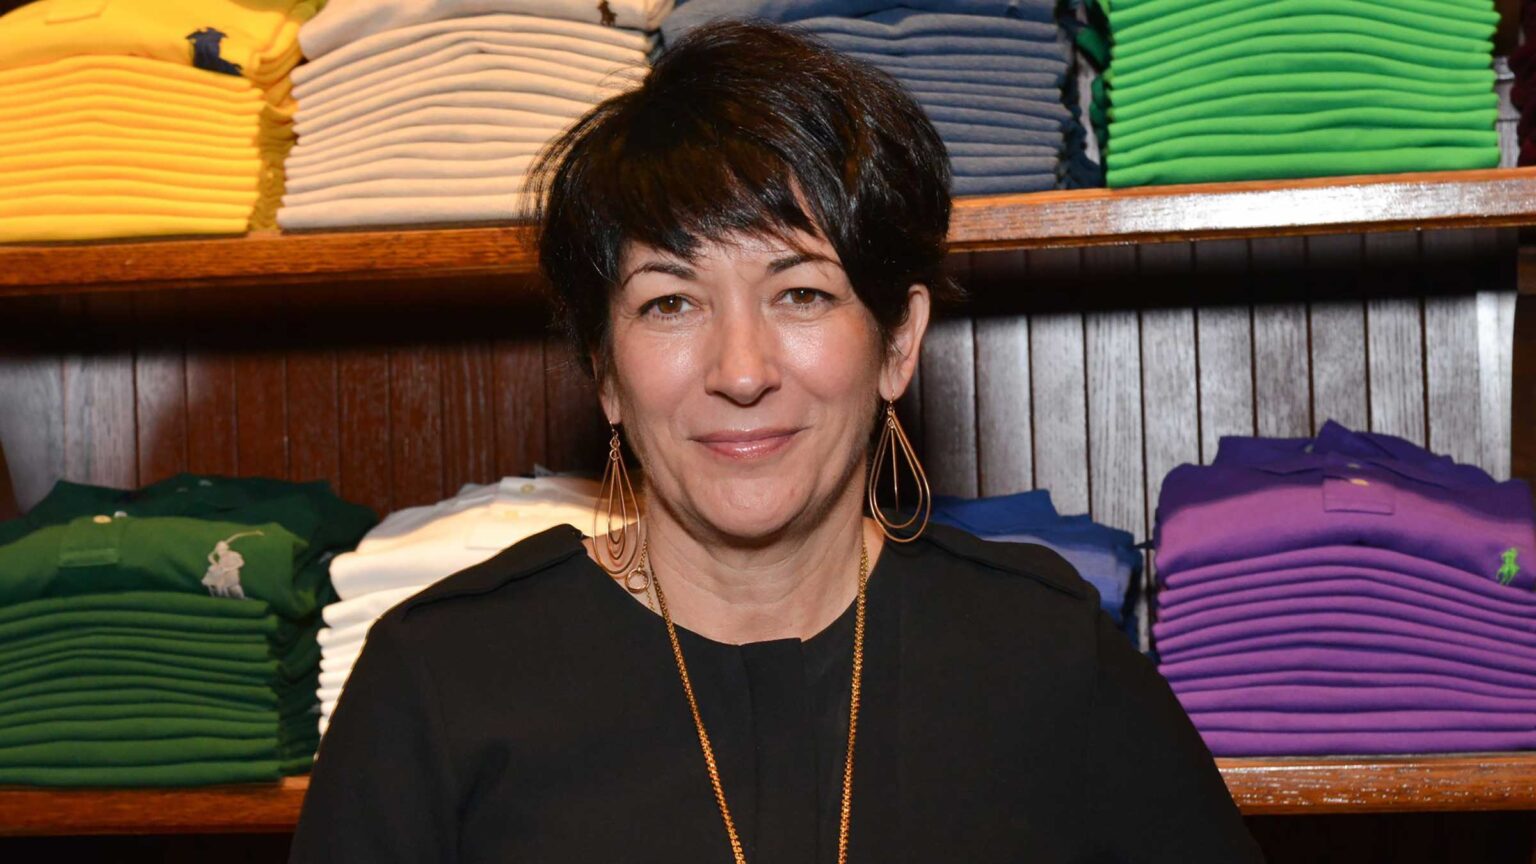 In the latest news – did Ghislaine Maxwell really just requested a gag order? Here's everything you need to know about the Jeffrey Epstein case.